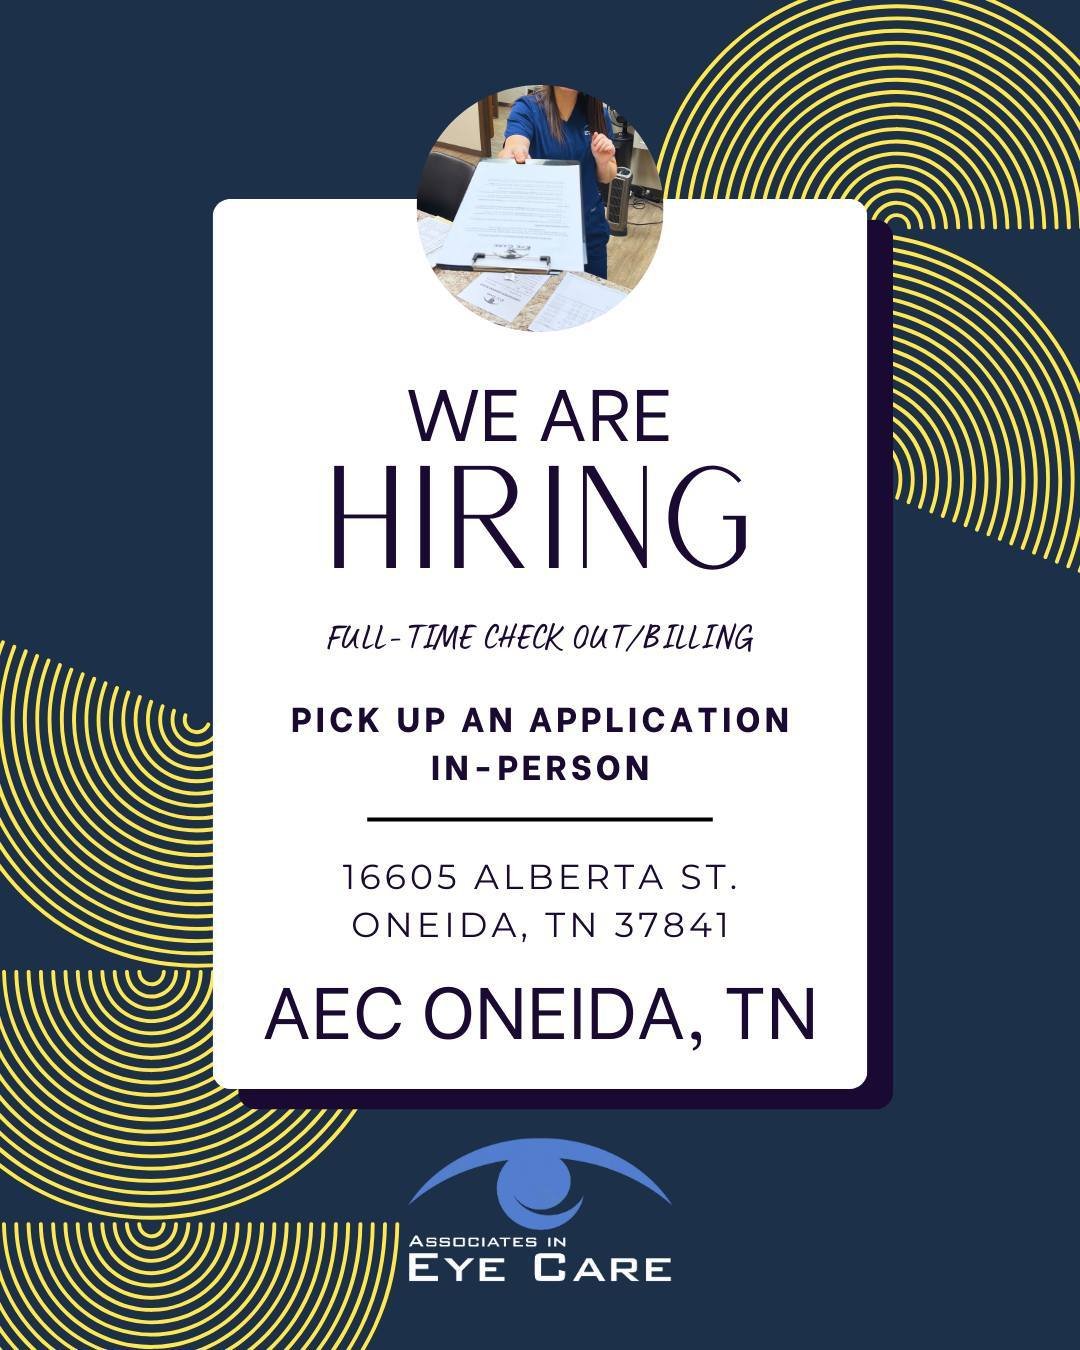 Work for people who care! Apply for a job with Associates In Eye Care. We are hiring for a full-time checkout and billing position. Prior experience is a plus. Pick up an application in person at 16605 Alberta St. Oneida, TN. Visit https://www.seemuc